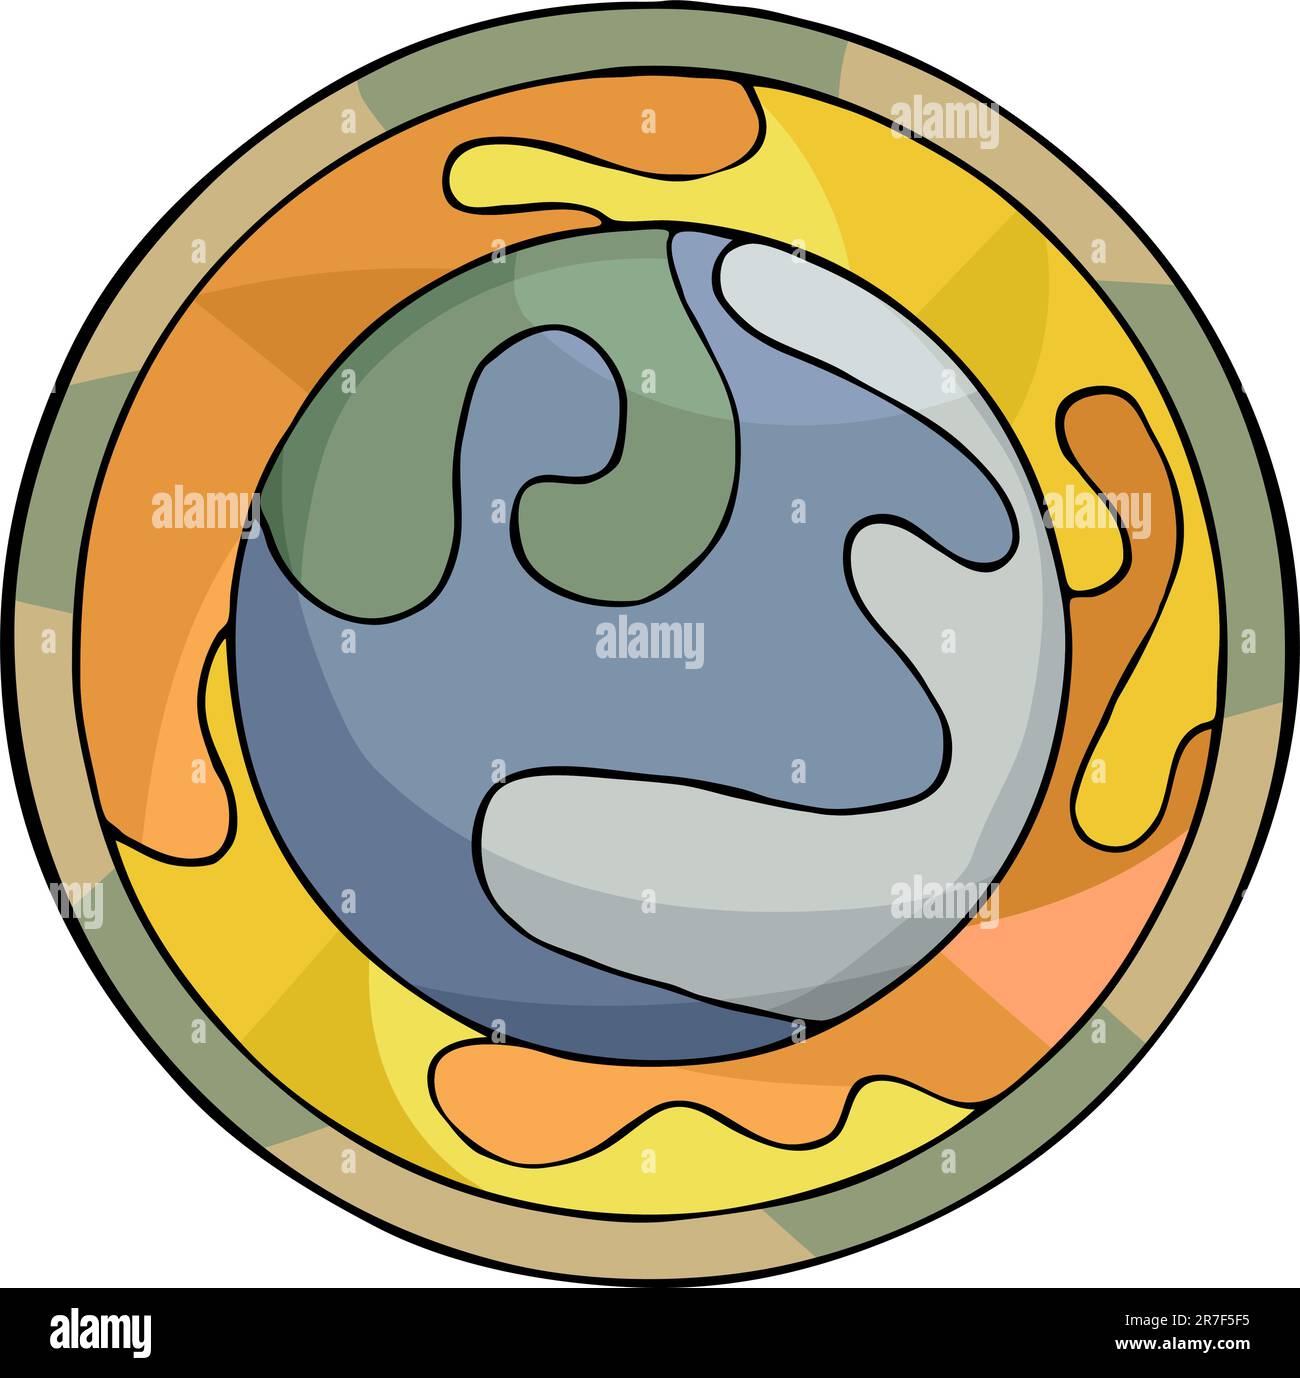 Illustration of the planet Earth and the trapped greenhouse gases in Meso-American style and composition. Stock Vector